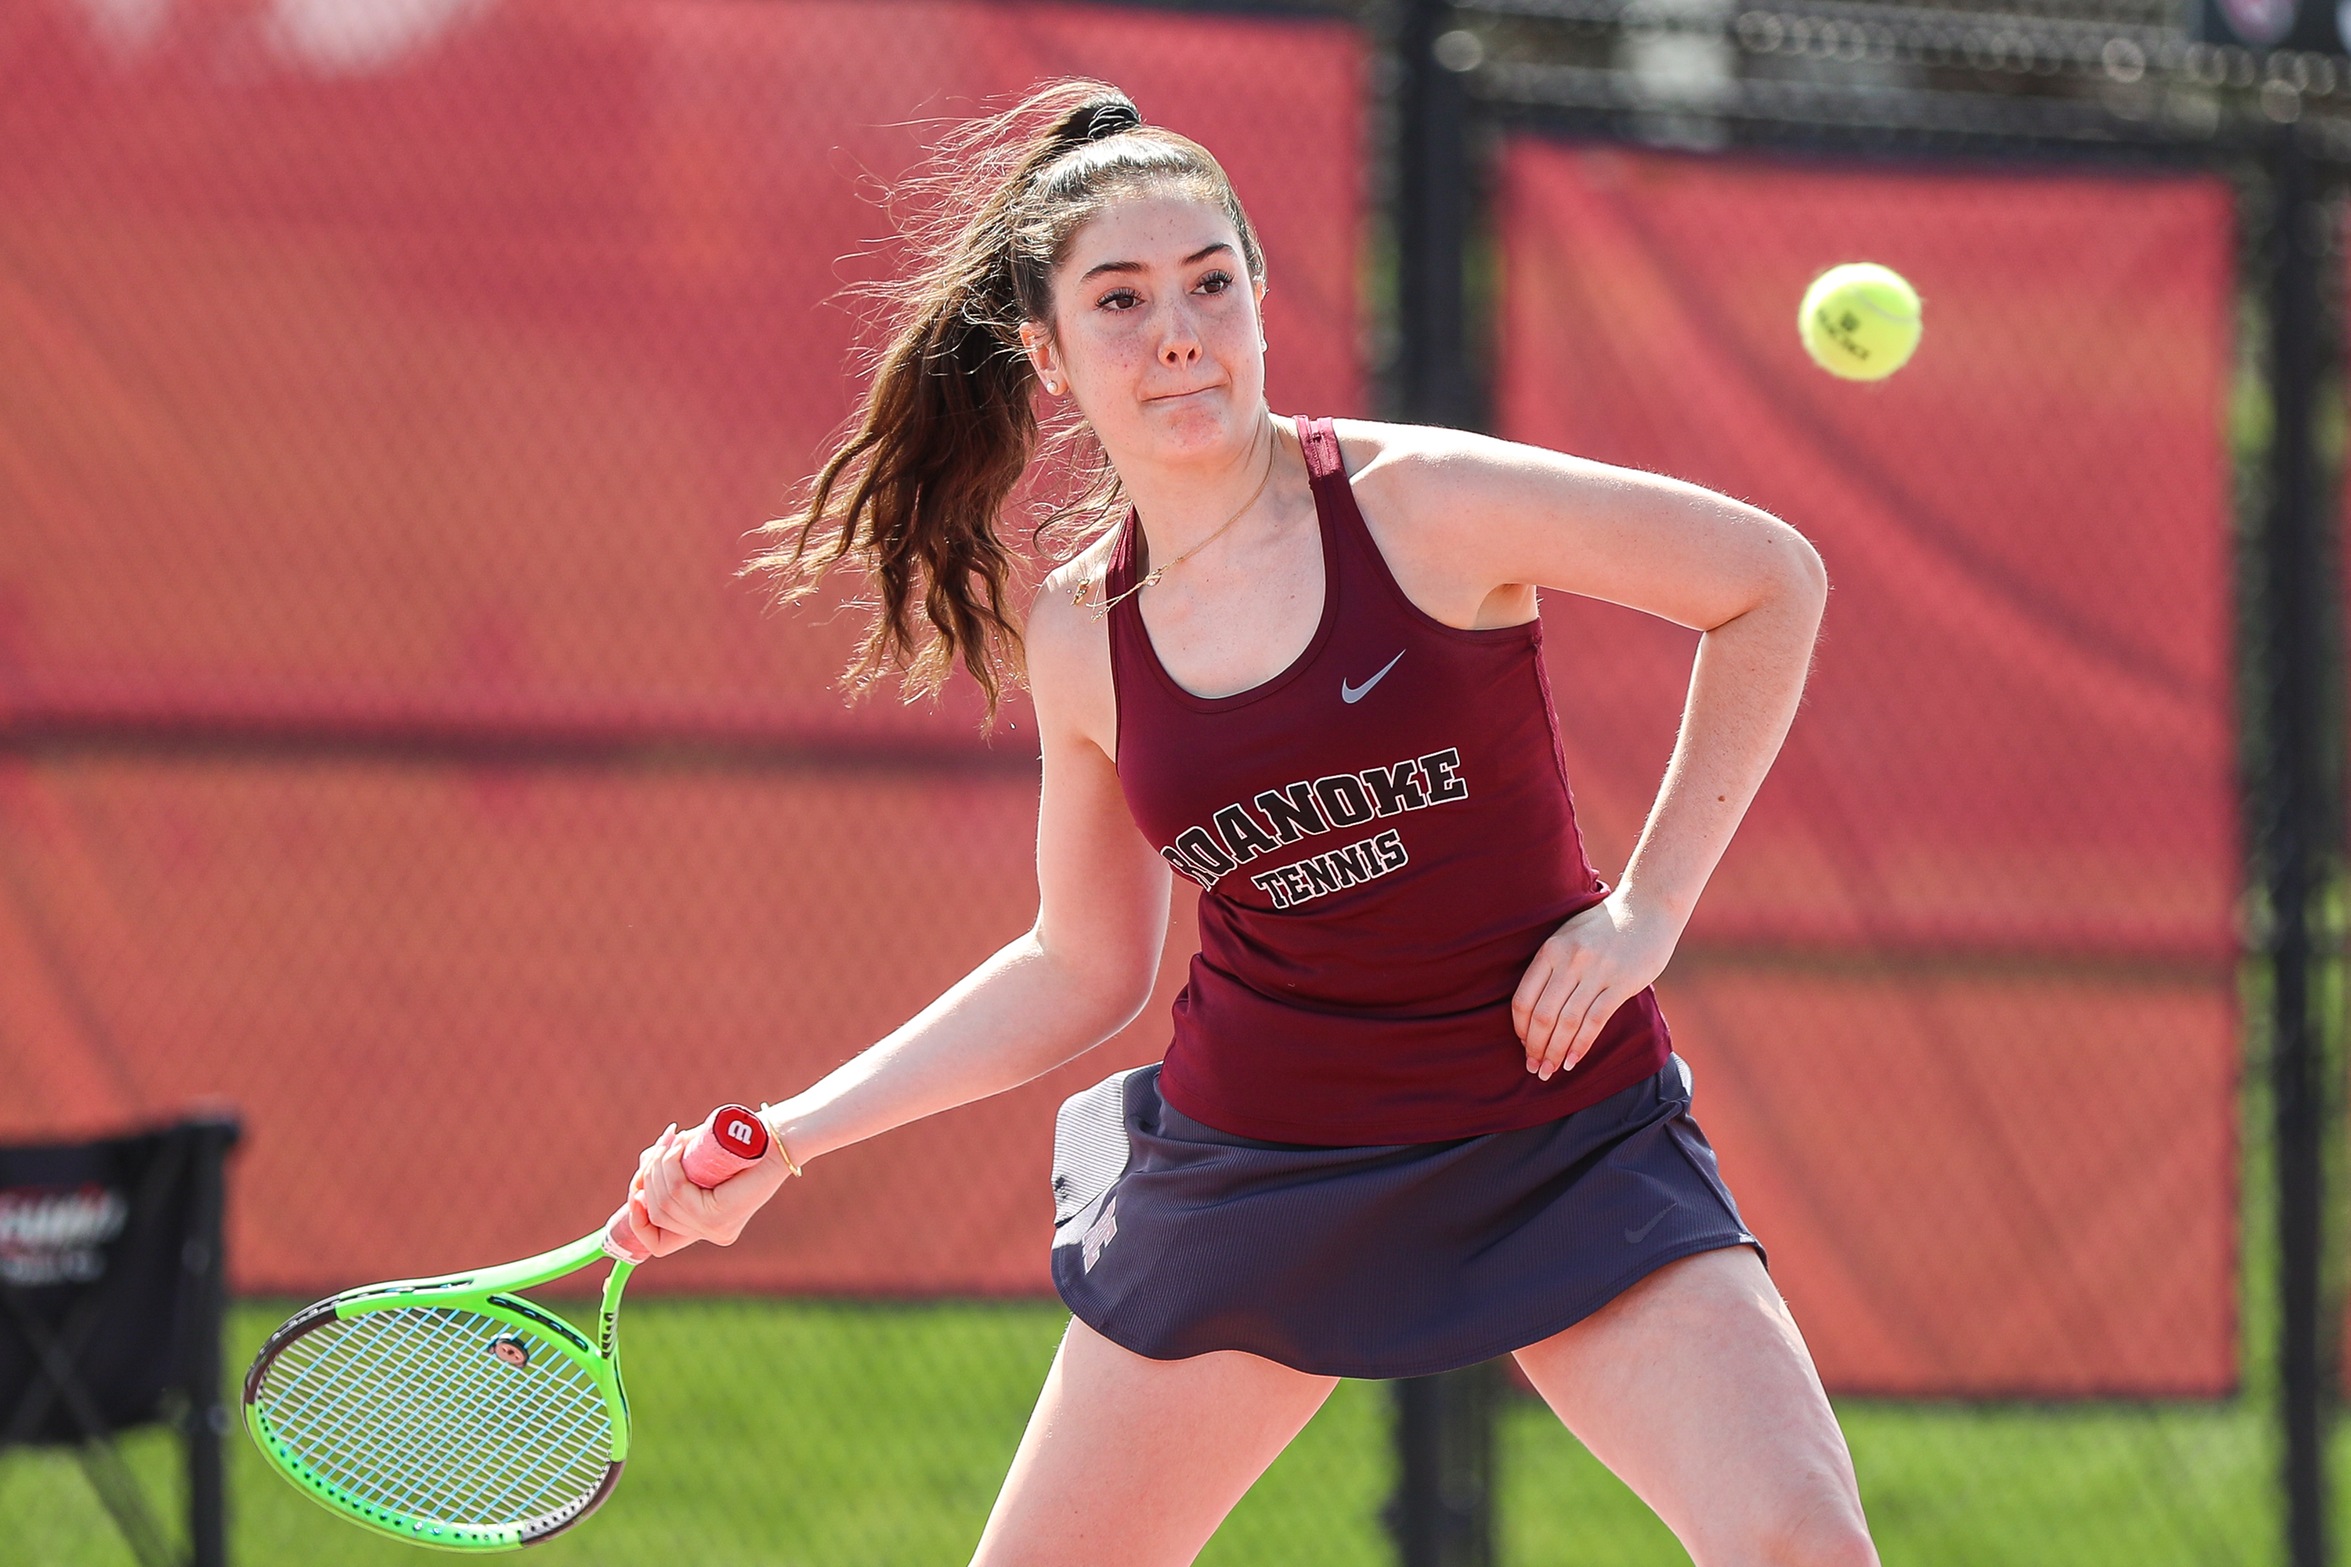 action photo of RC women's tennis player hitting a forehand